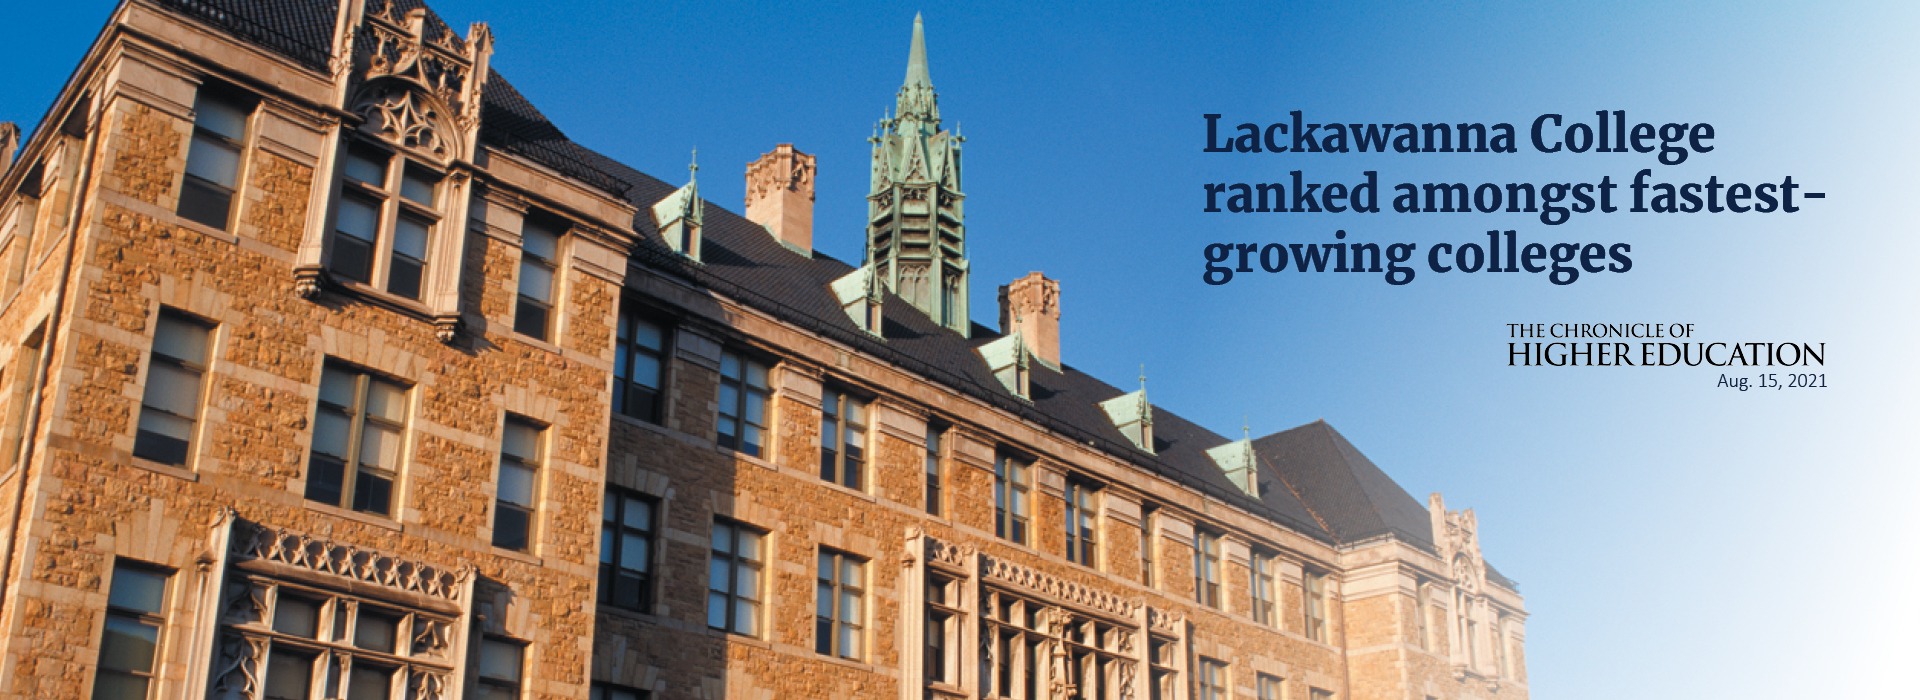 Lackawanna College ranked amongst fastest-growing colleges - The Chronicle of Higher Education - Aug 15, 2021